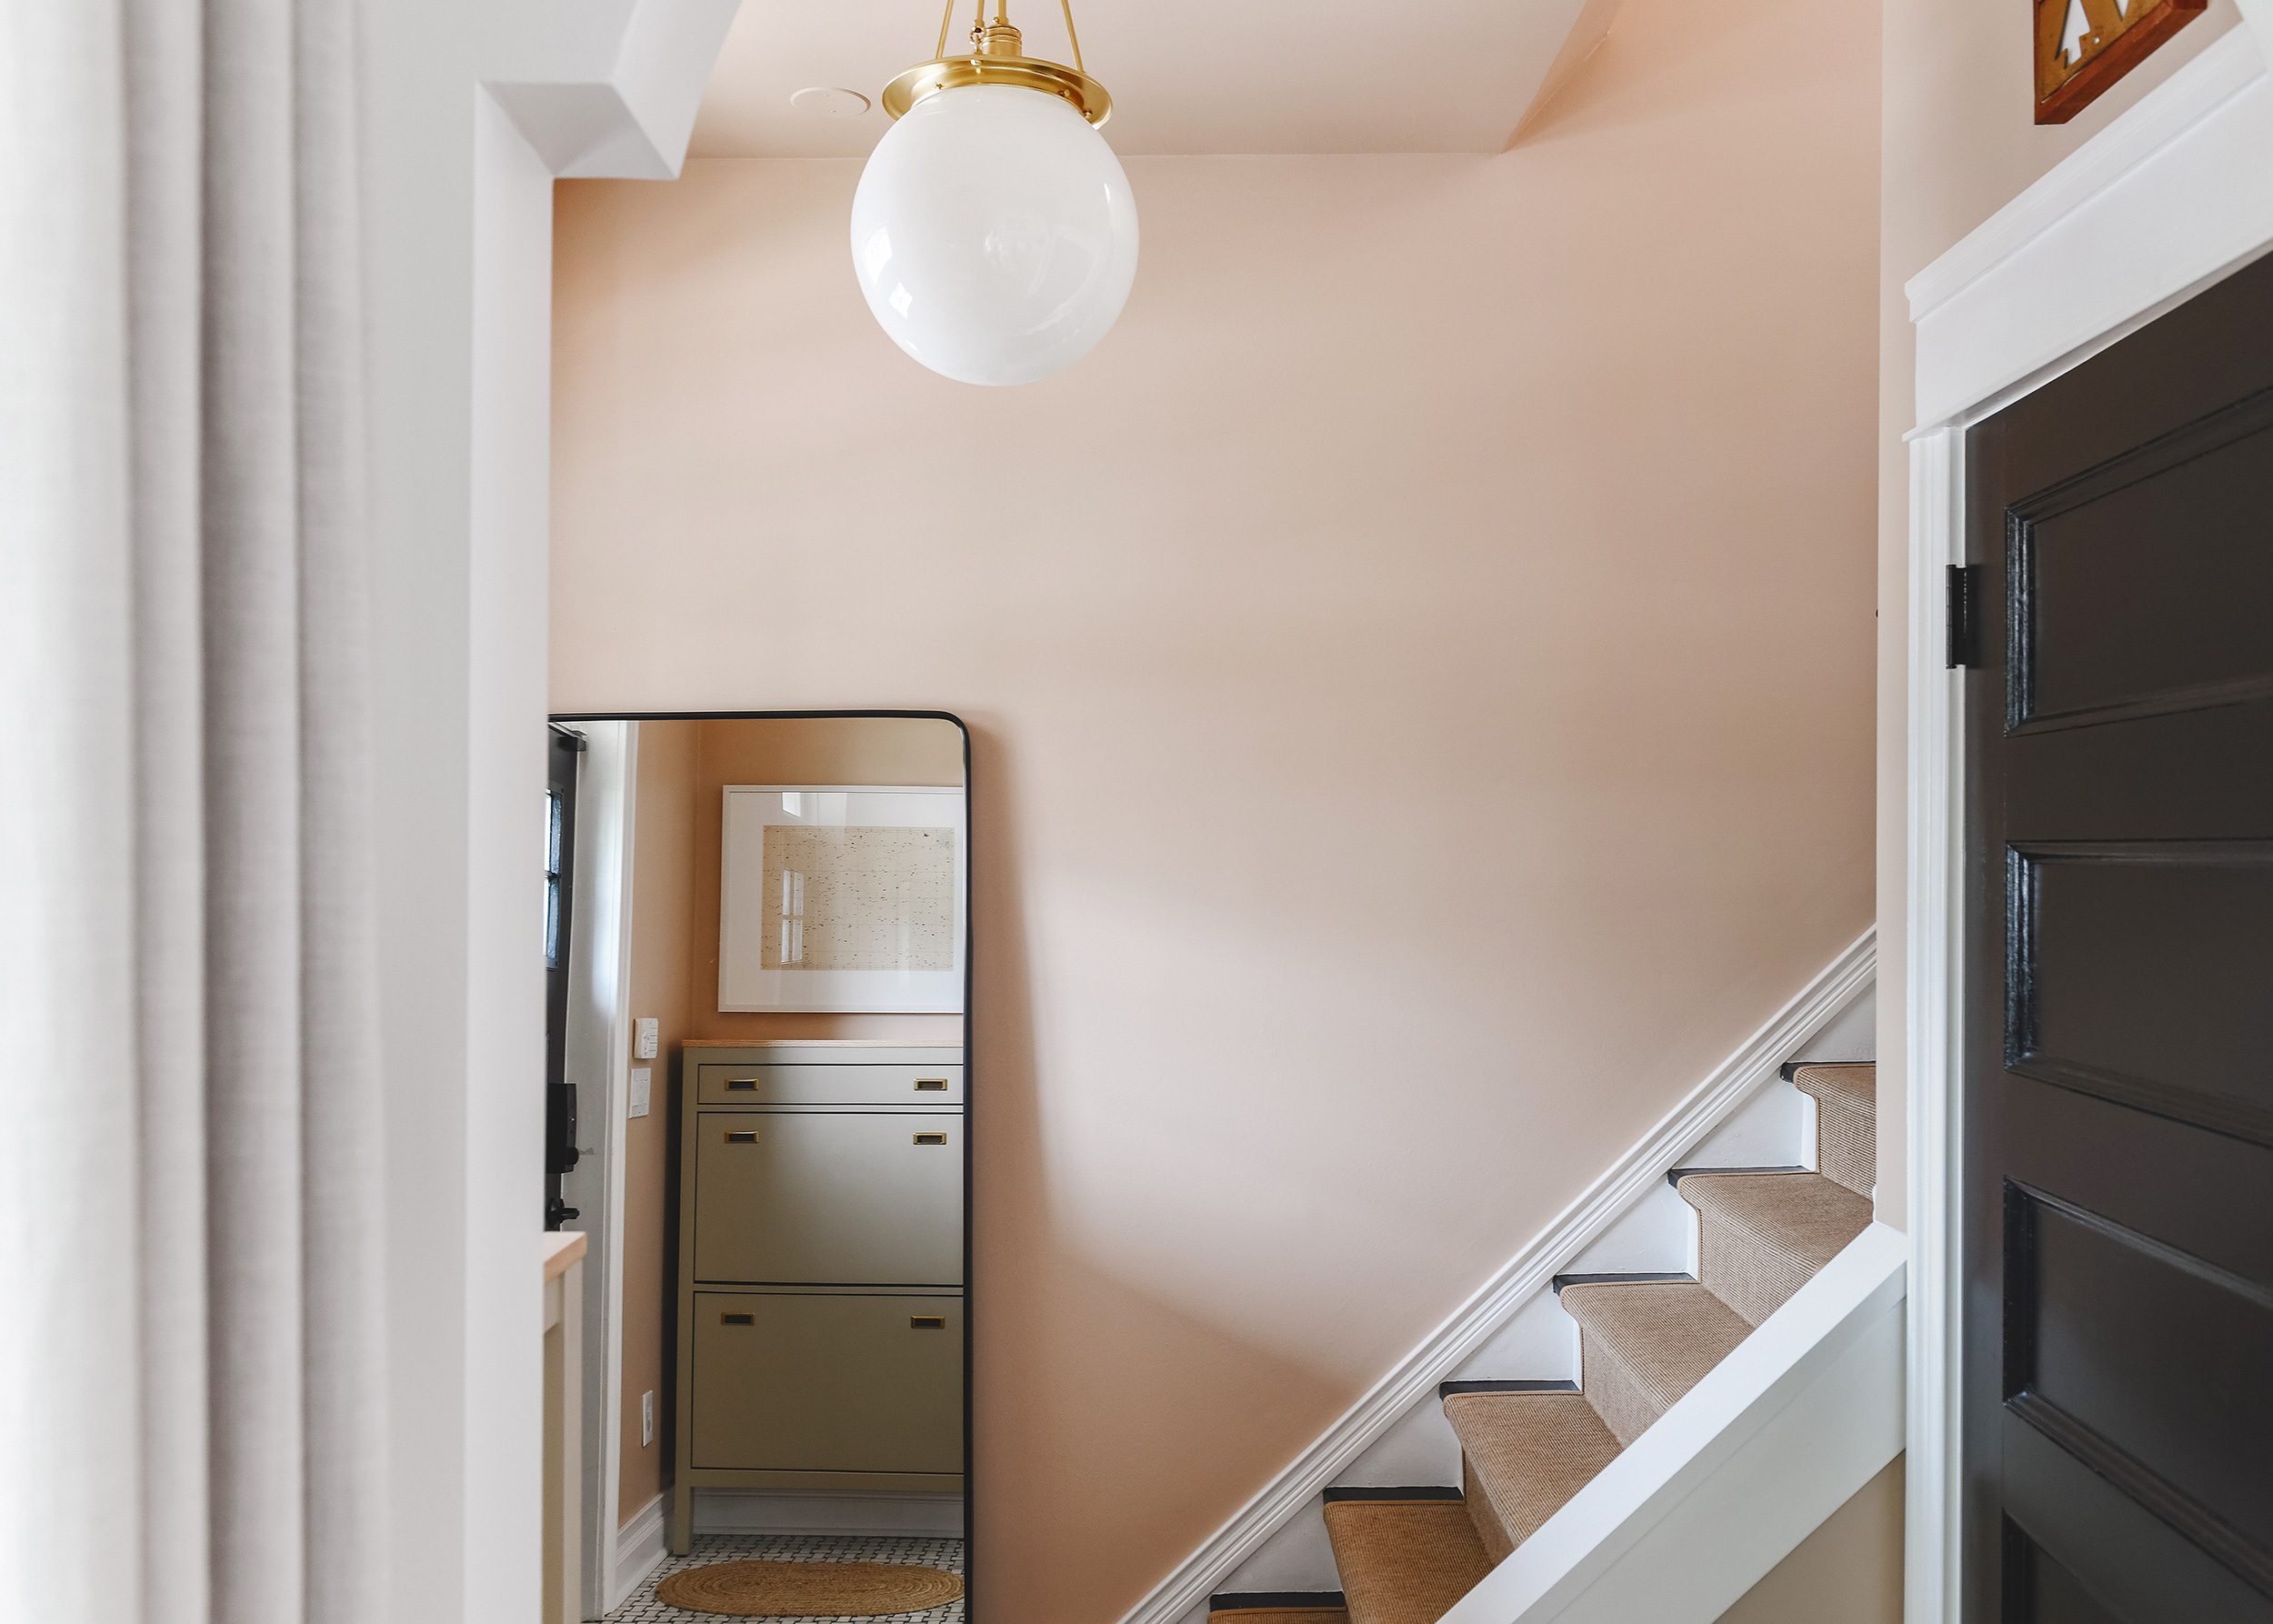 Peachy entryway wide shot | How to Install a Stair Runner in 10 Steps via Yellow Brick Home